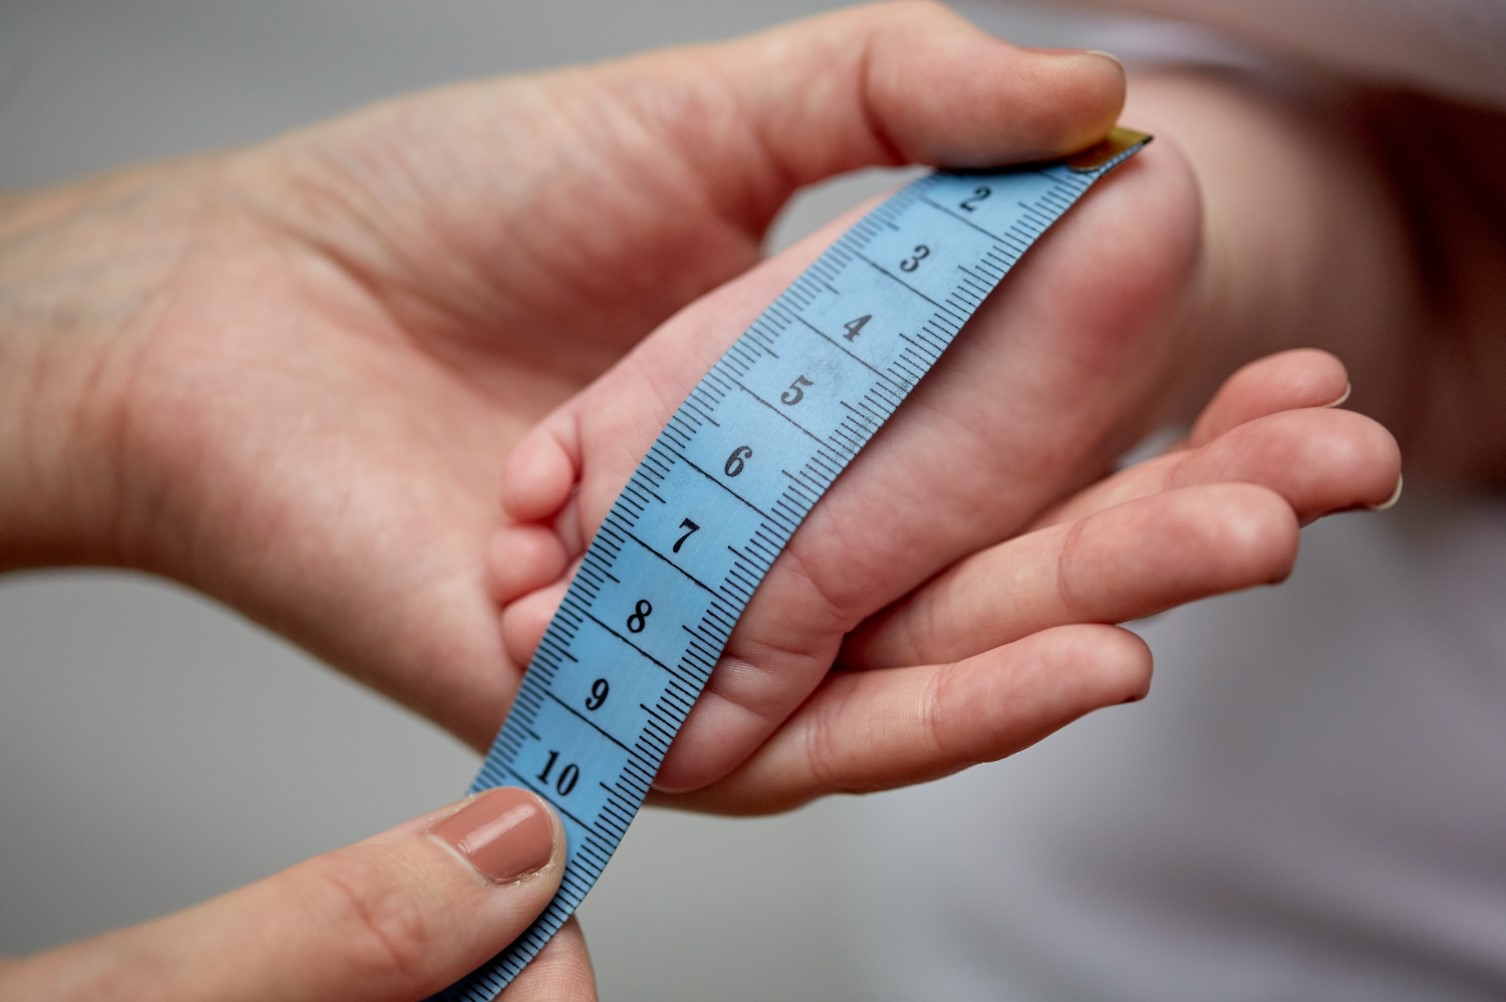 A close up of hands measuring a baby’s foot with a tape measure.